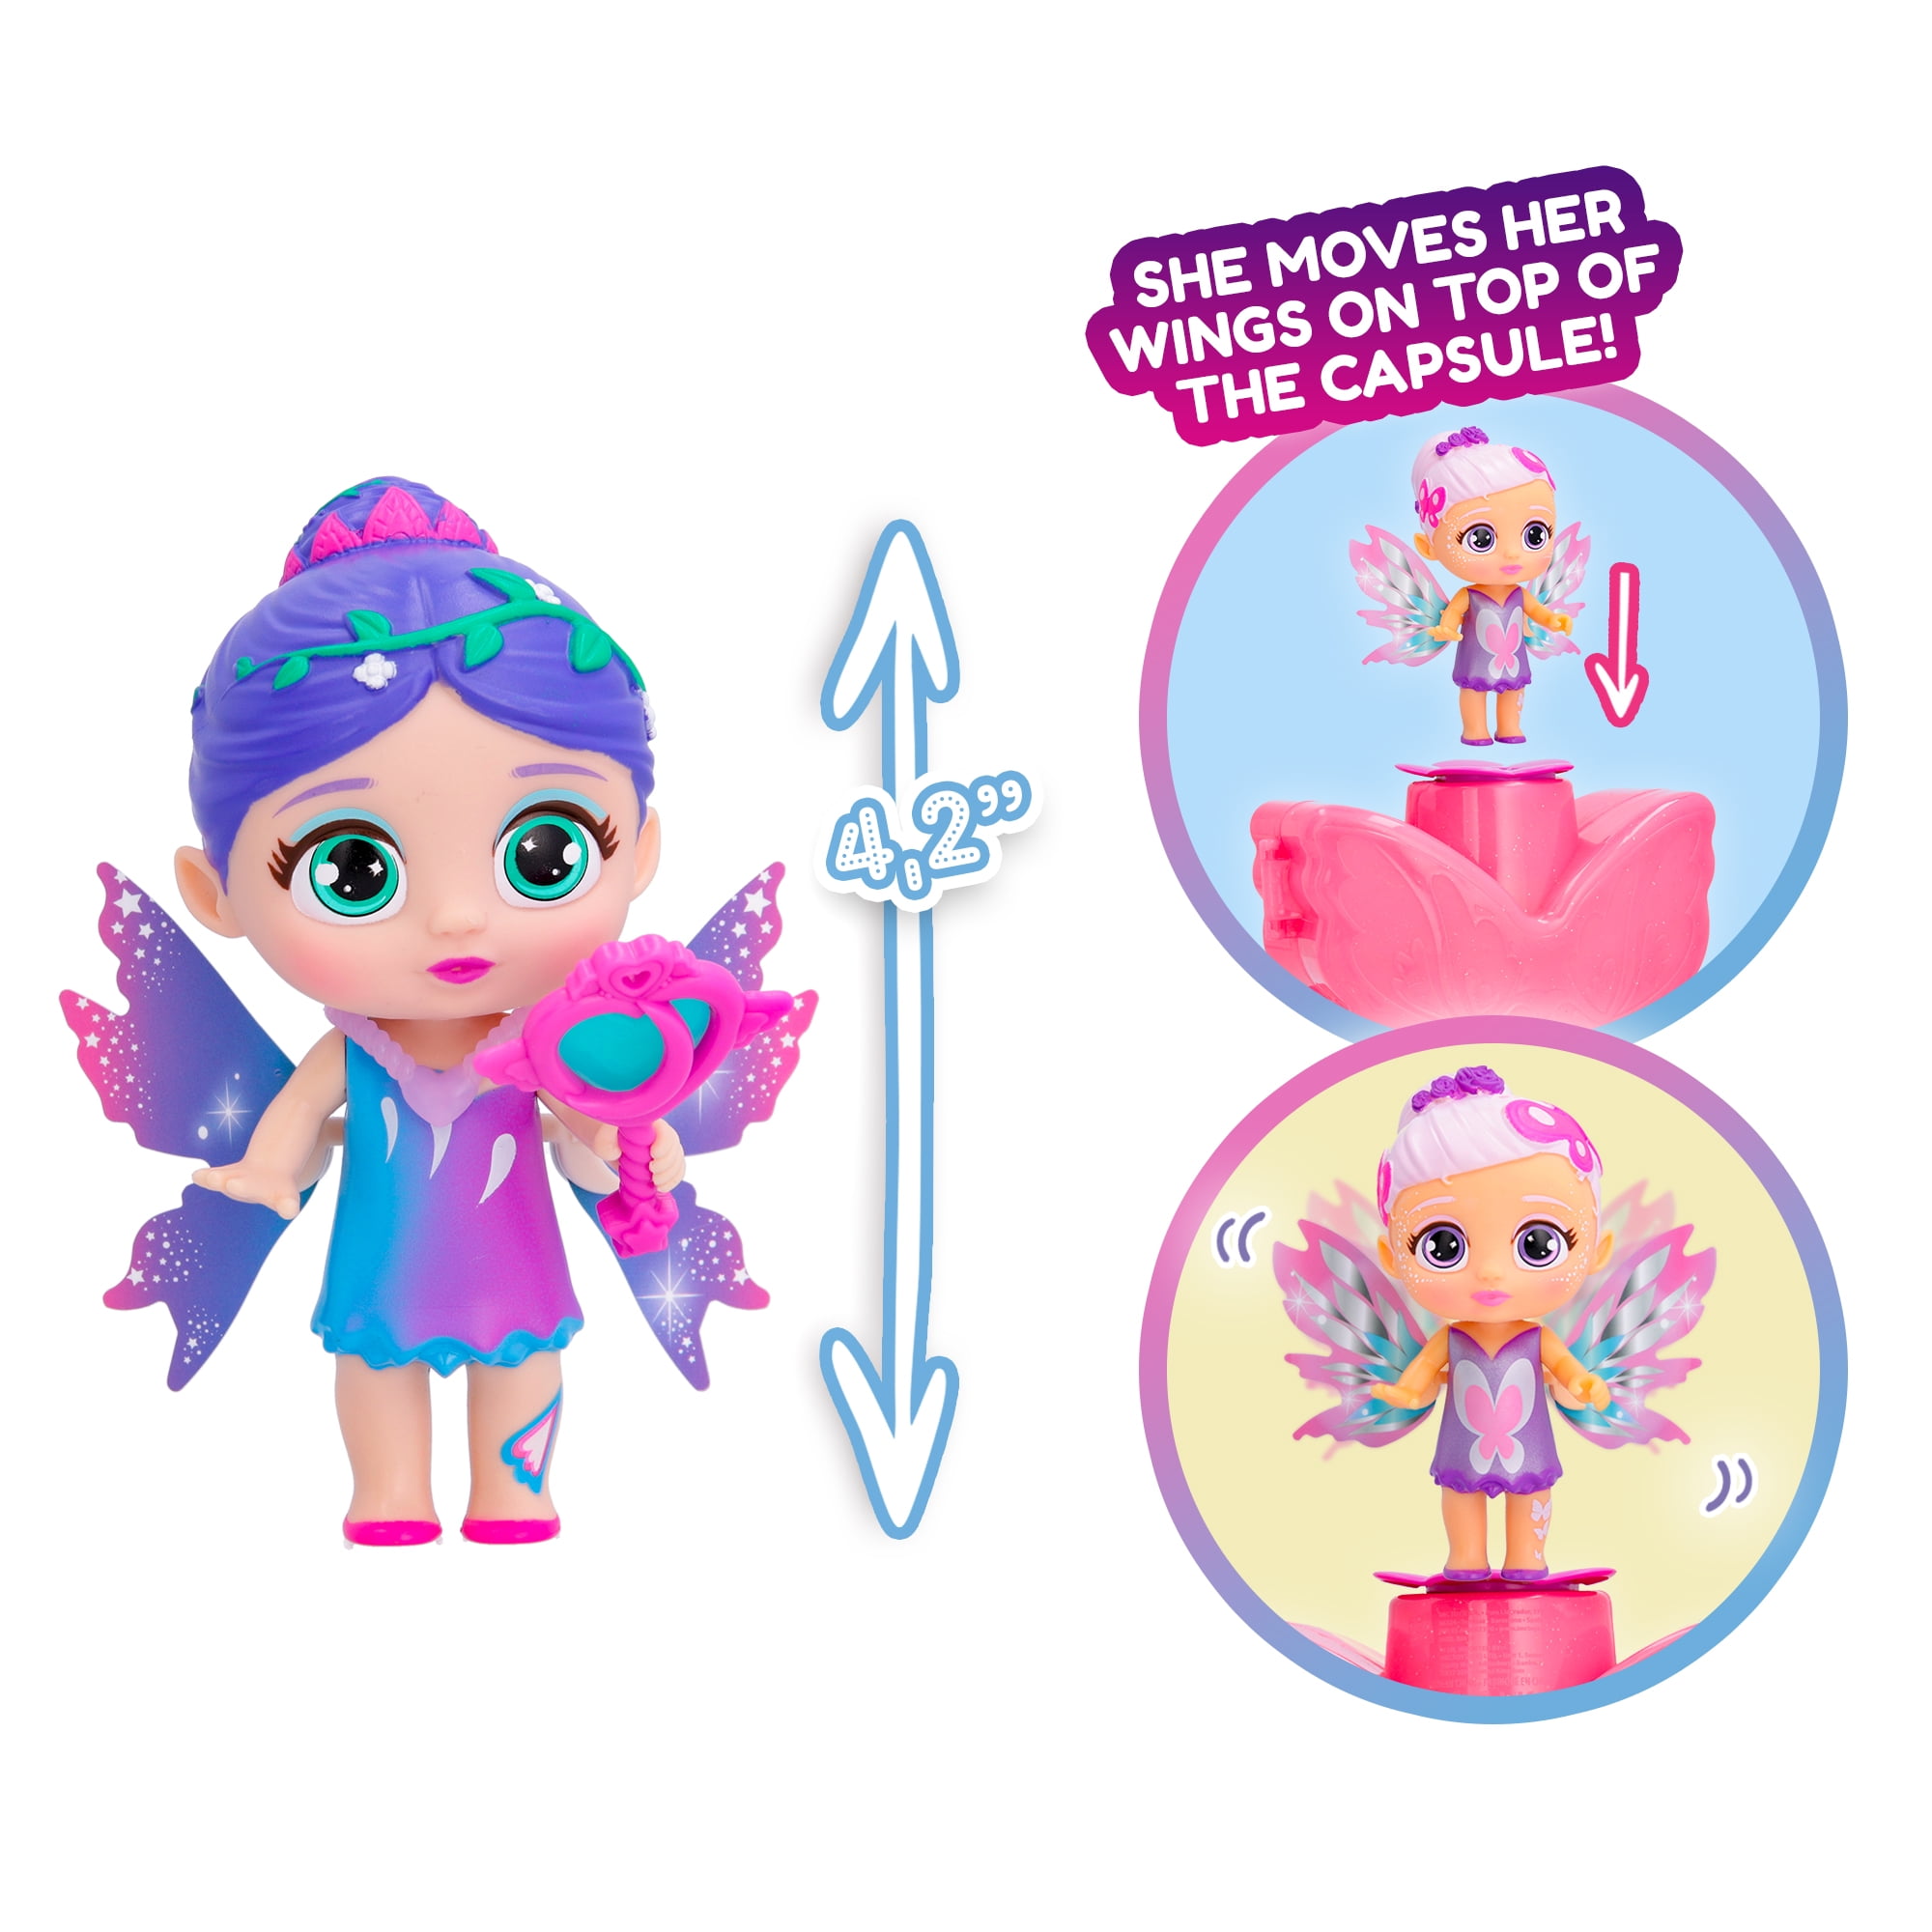  Bloopies Fairies - light up collectible doll : Toys & Games